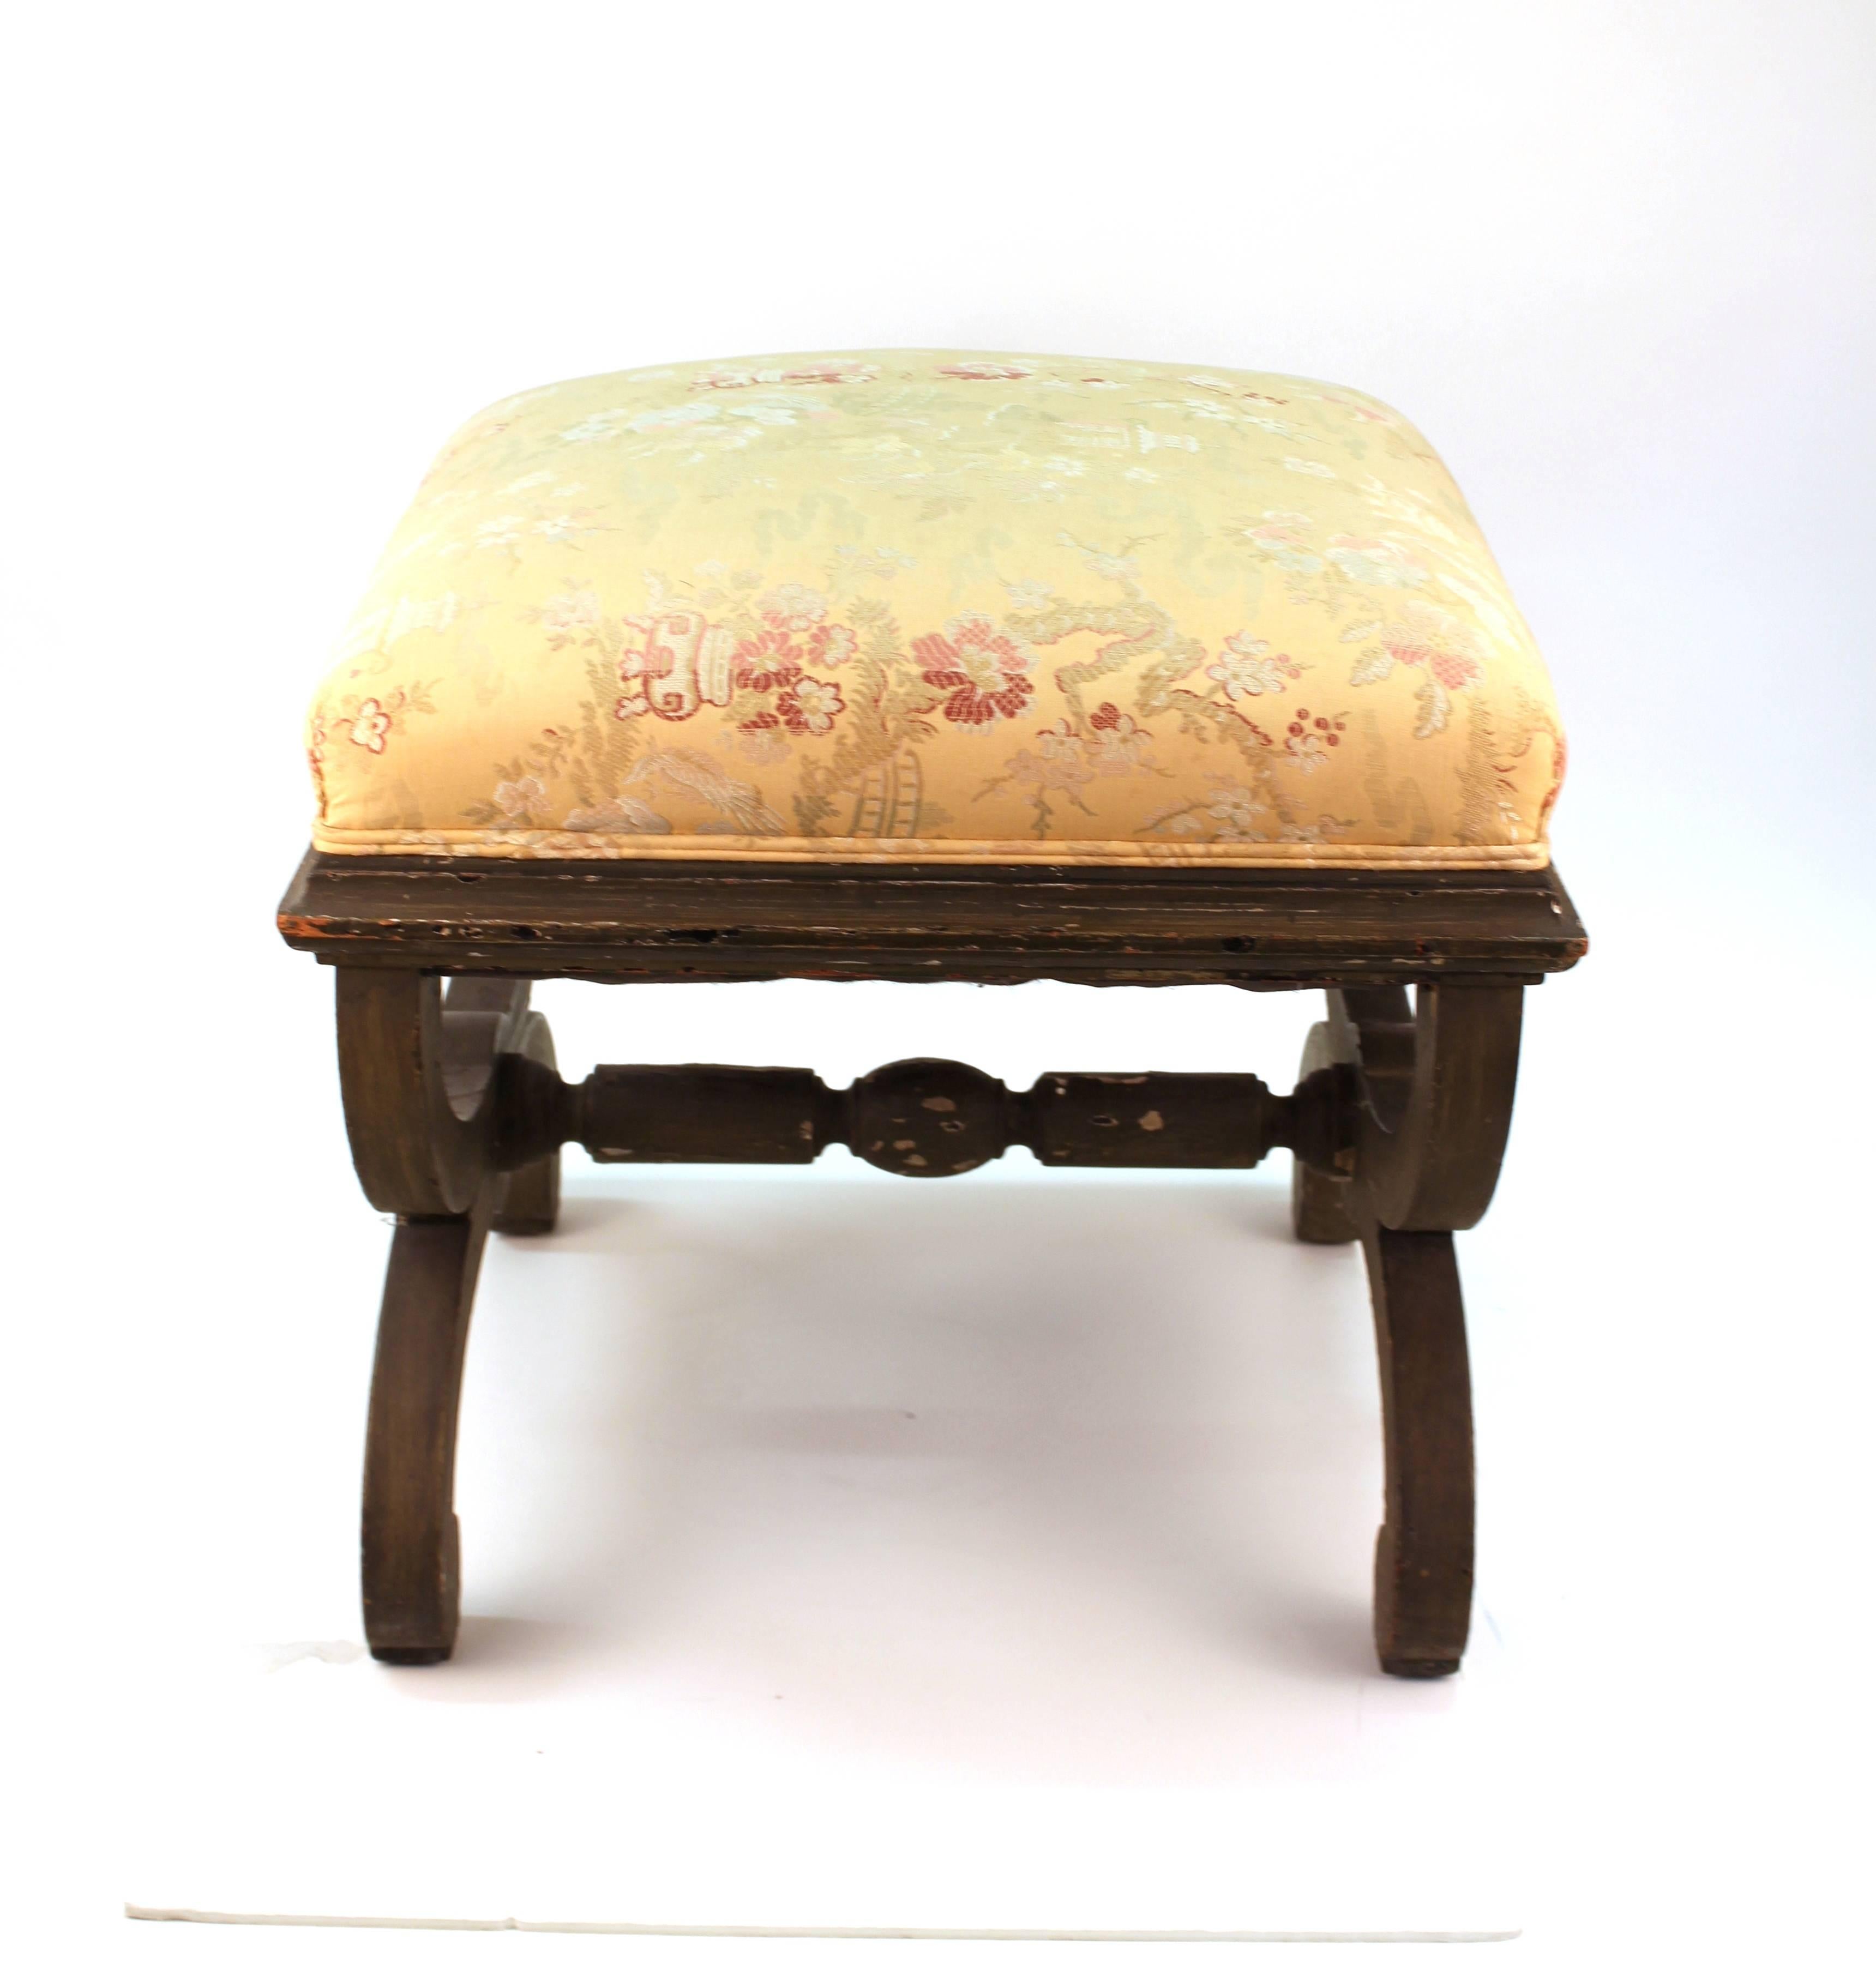 19th Century Victorian Painted Wood Stools in Gray with Asian Style Textile Upholstery